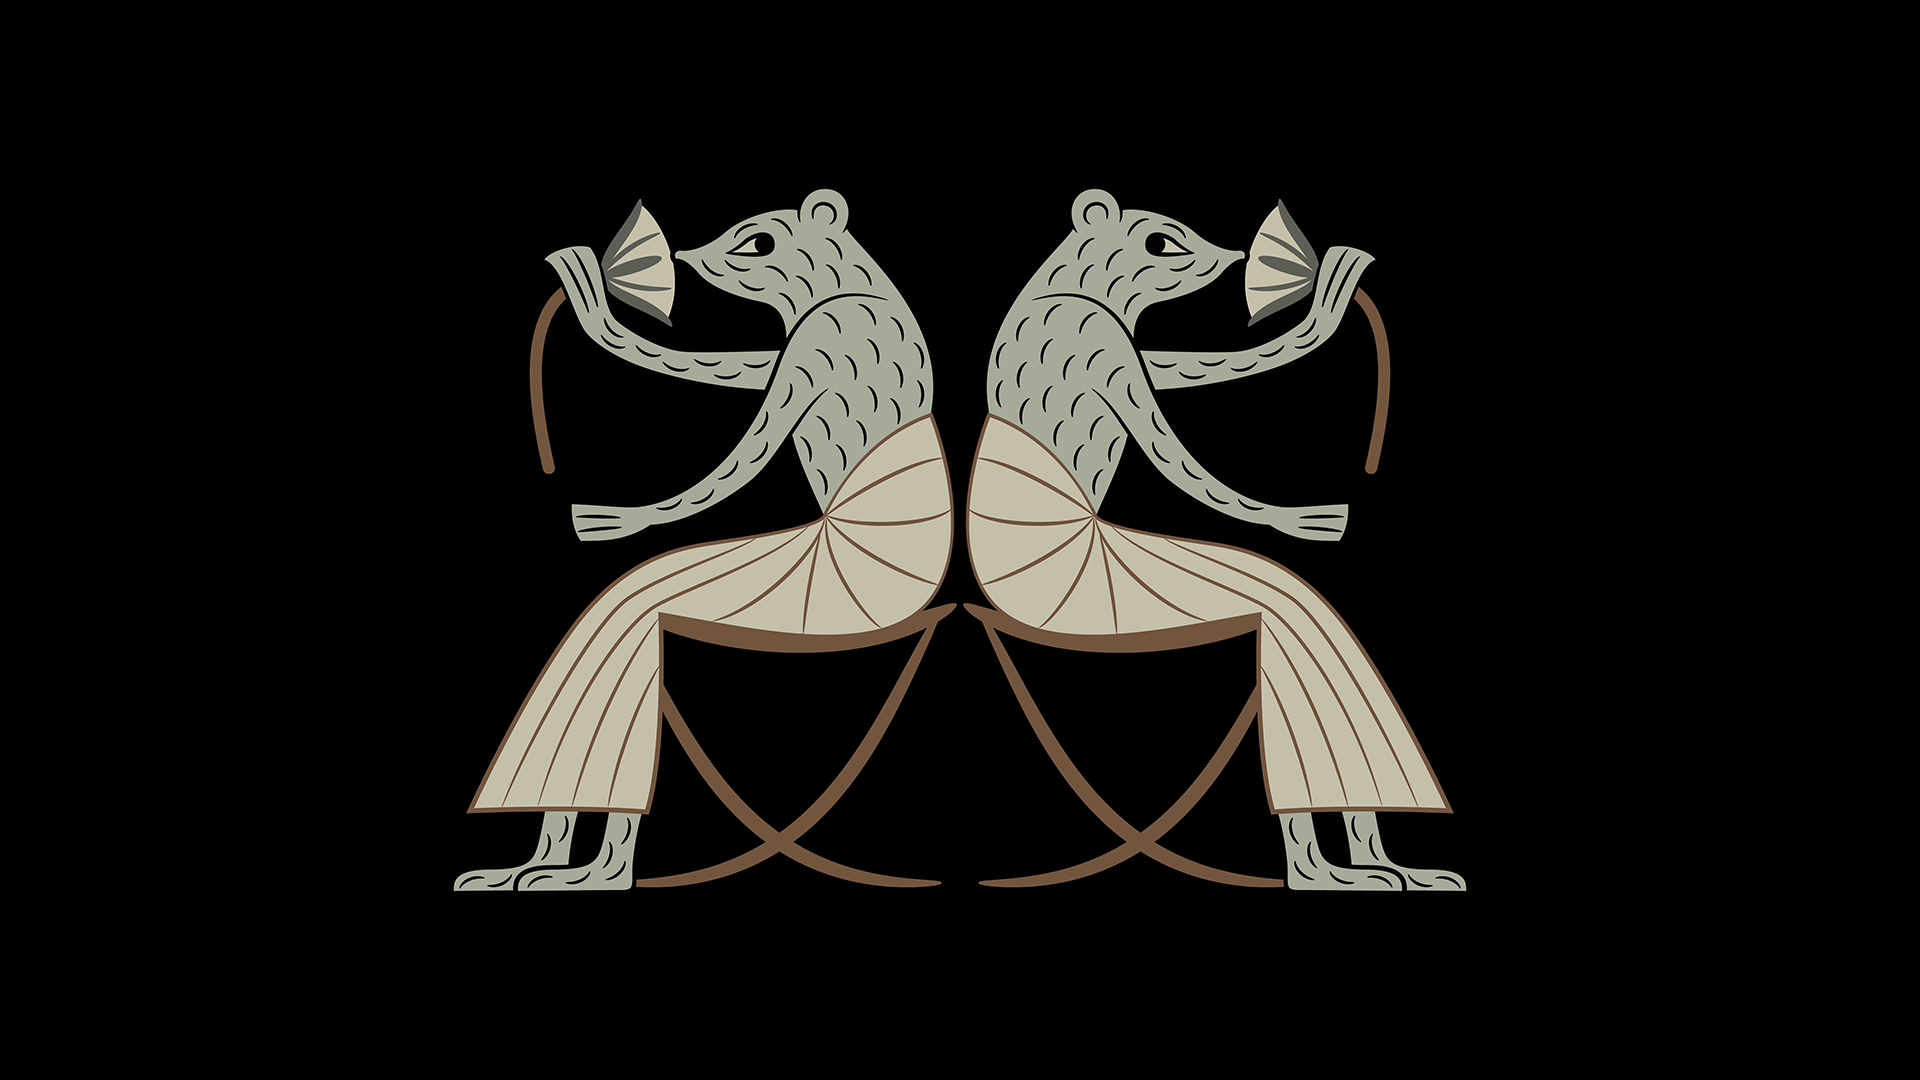 Two rats sitting on chairs, eyeing each other suspiciously. In the style of Ancient Egyptian art.